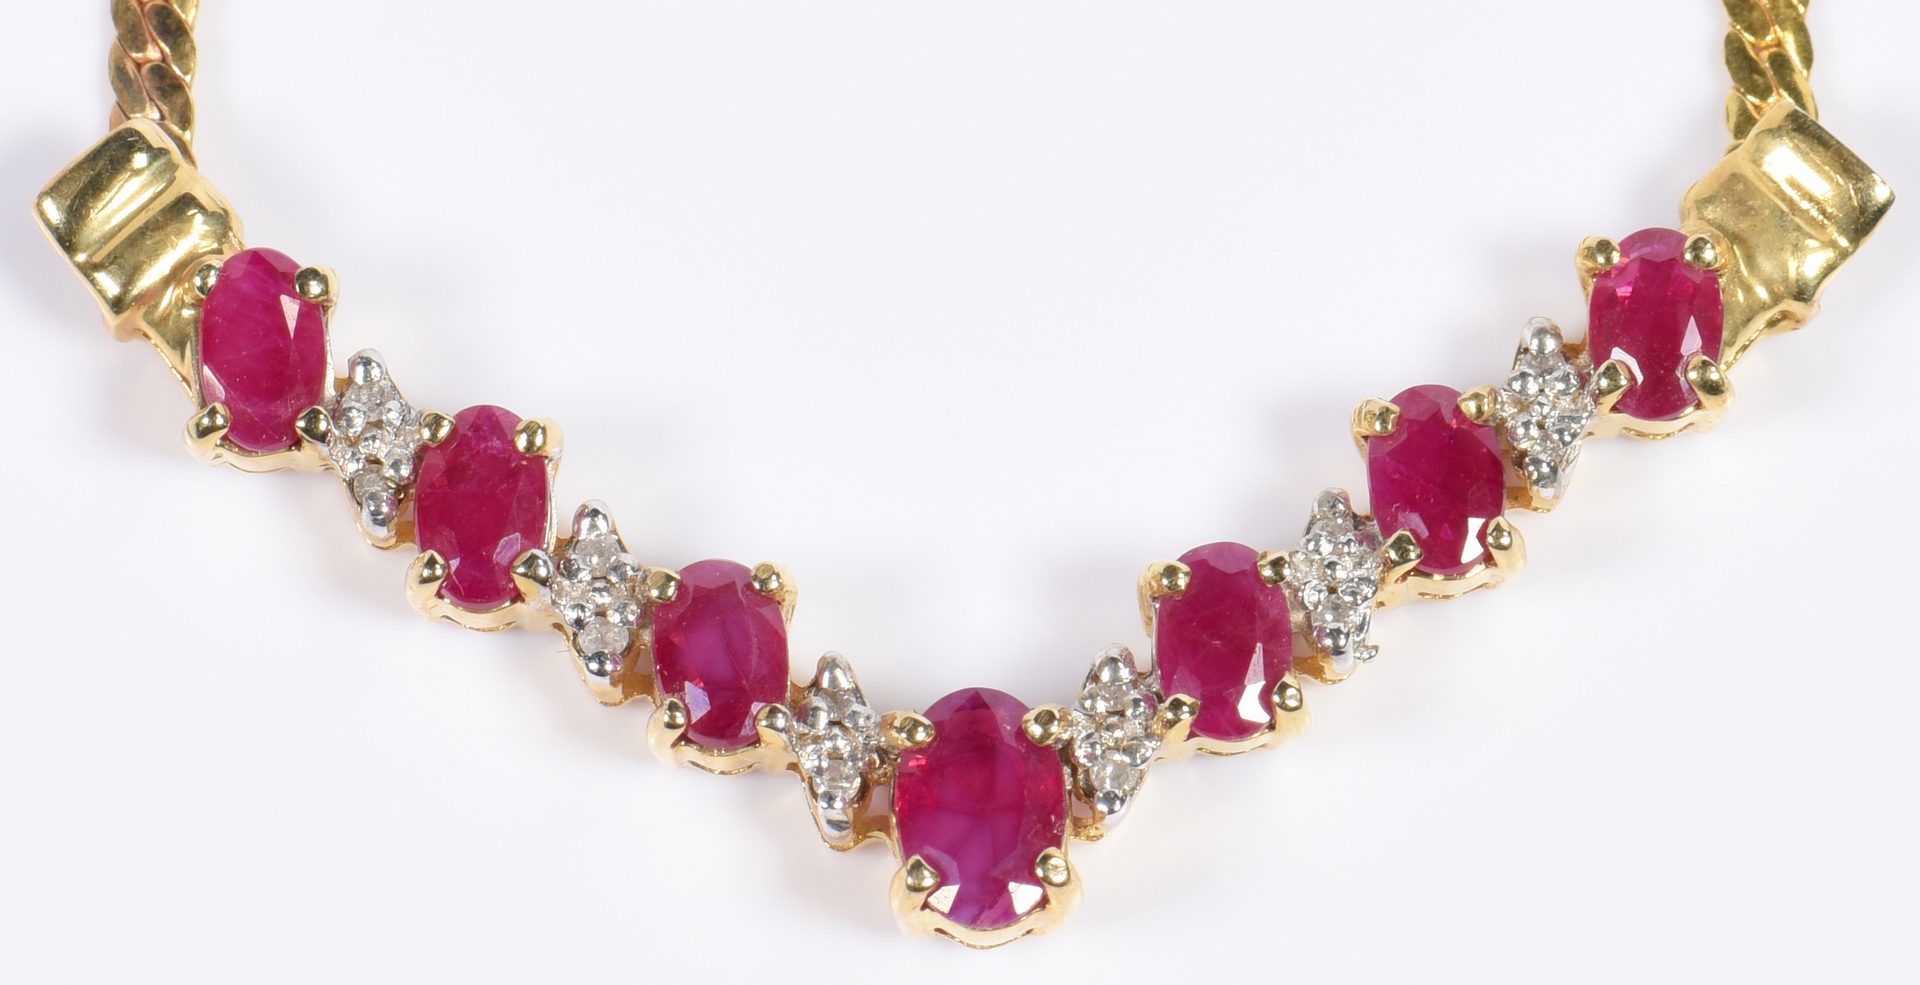 Lot 974: 4 pcs Gold and Ruby Jewelry